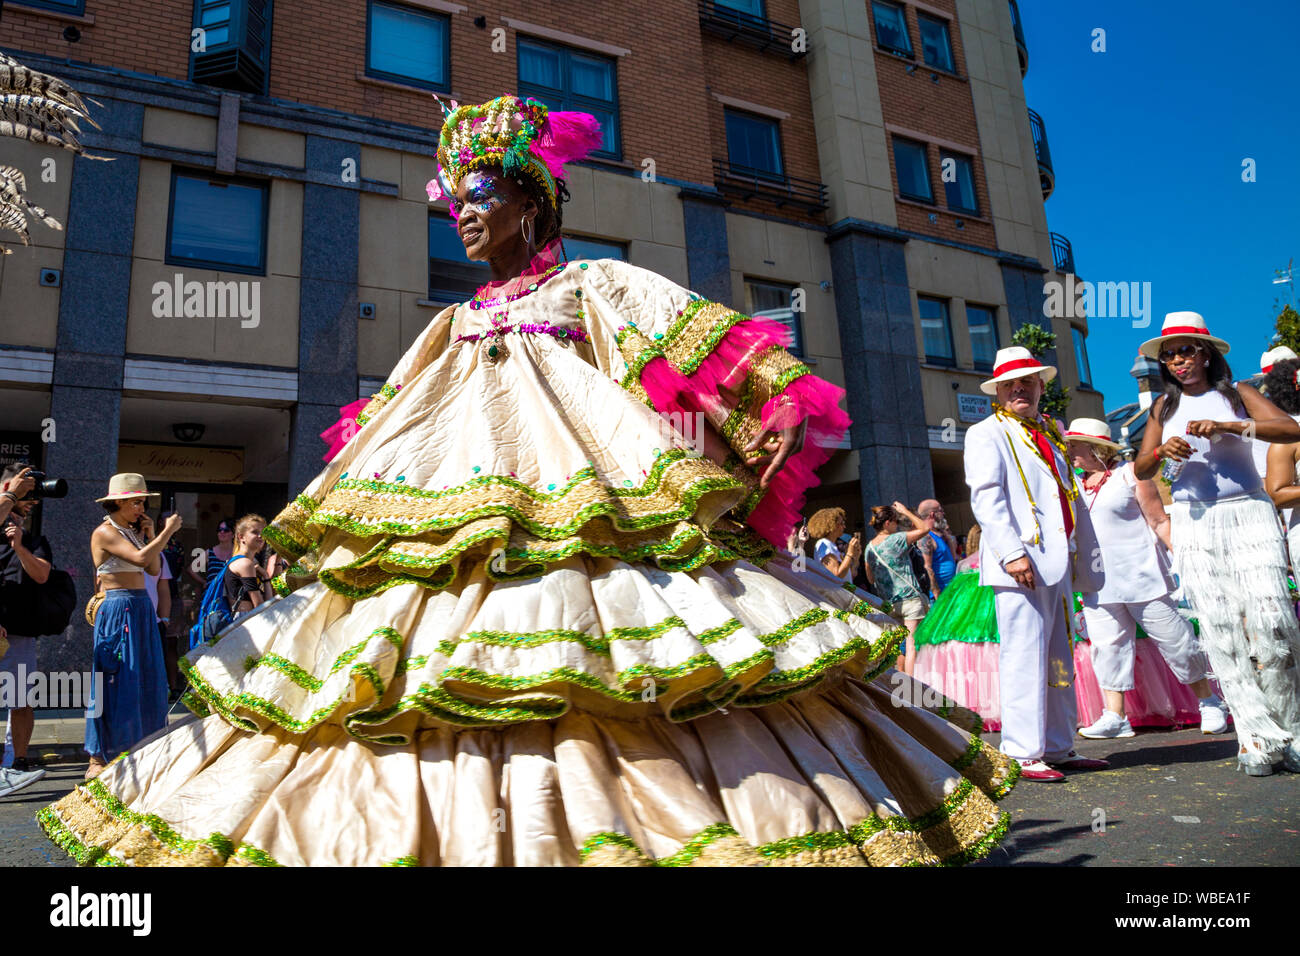 26 August 2019 - Female dancer wearing a big dress and headdress at Notting Hill Carnival on a hot Bank Holiday Monday, London, UK Stock Photo